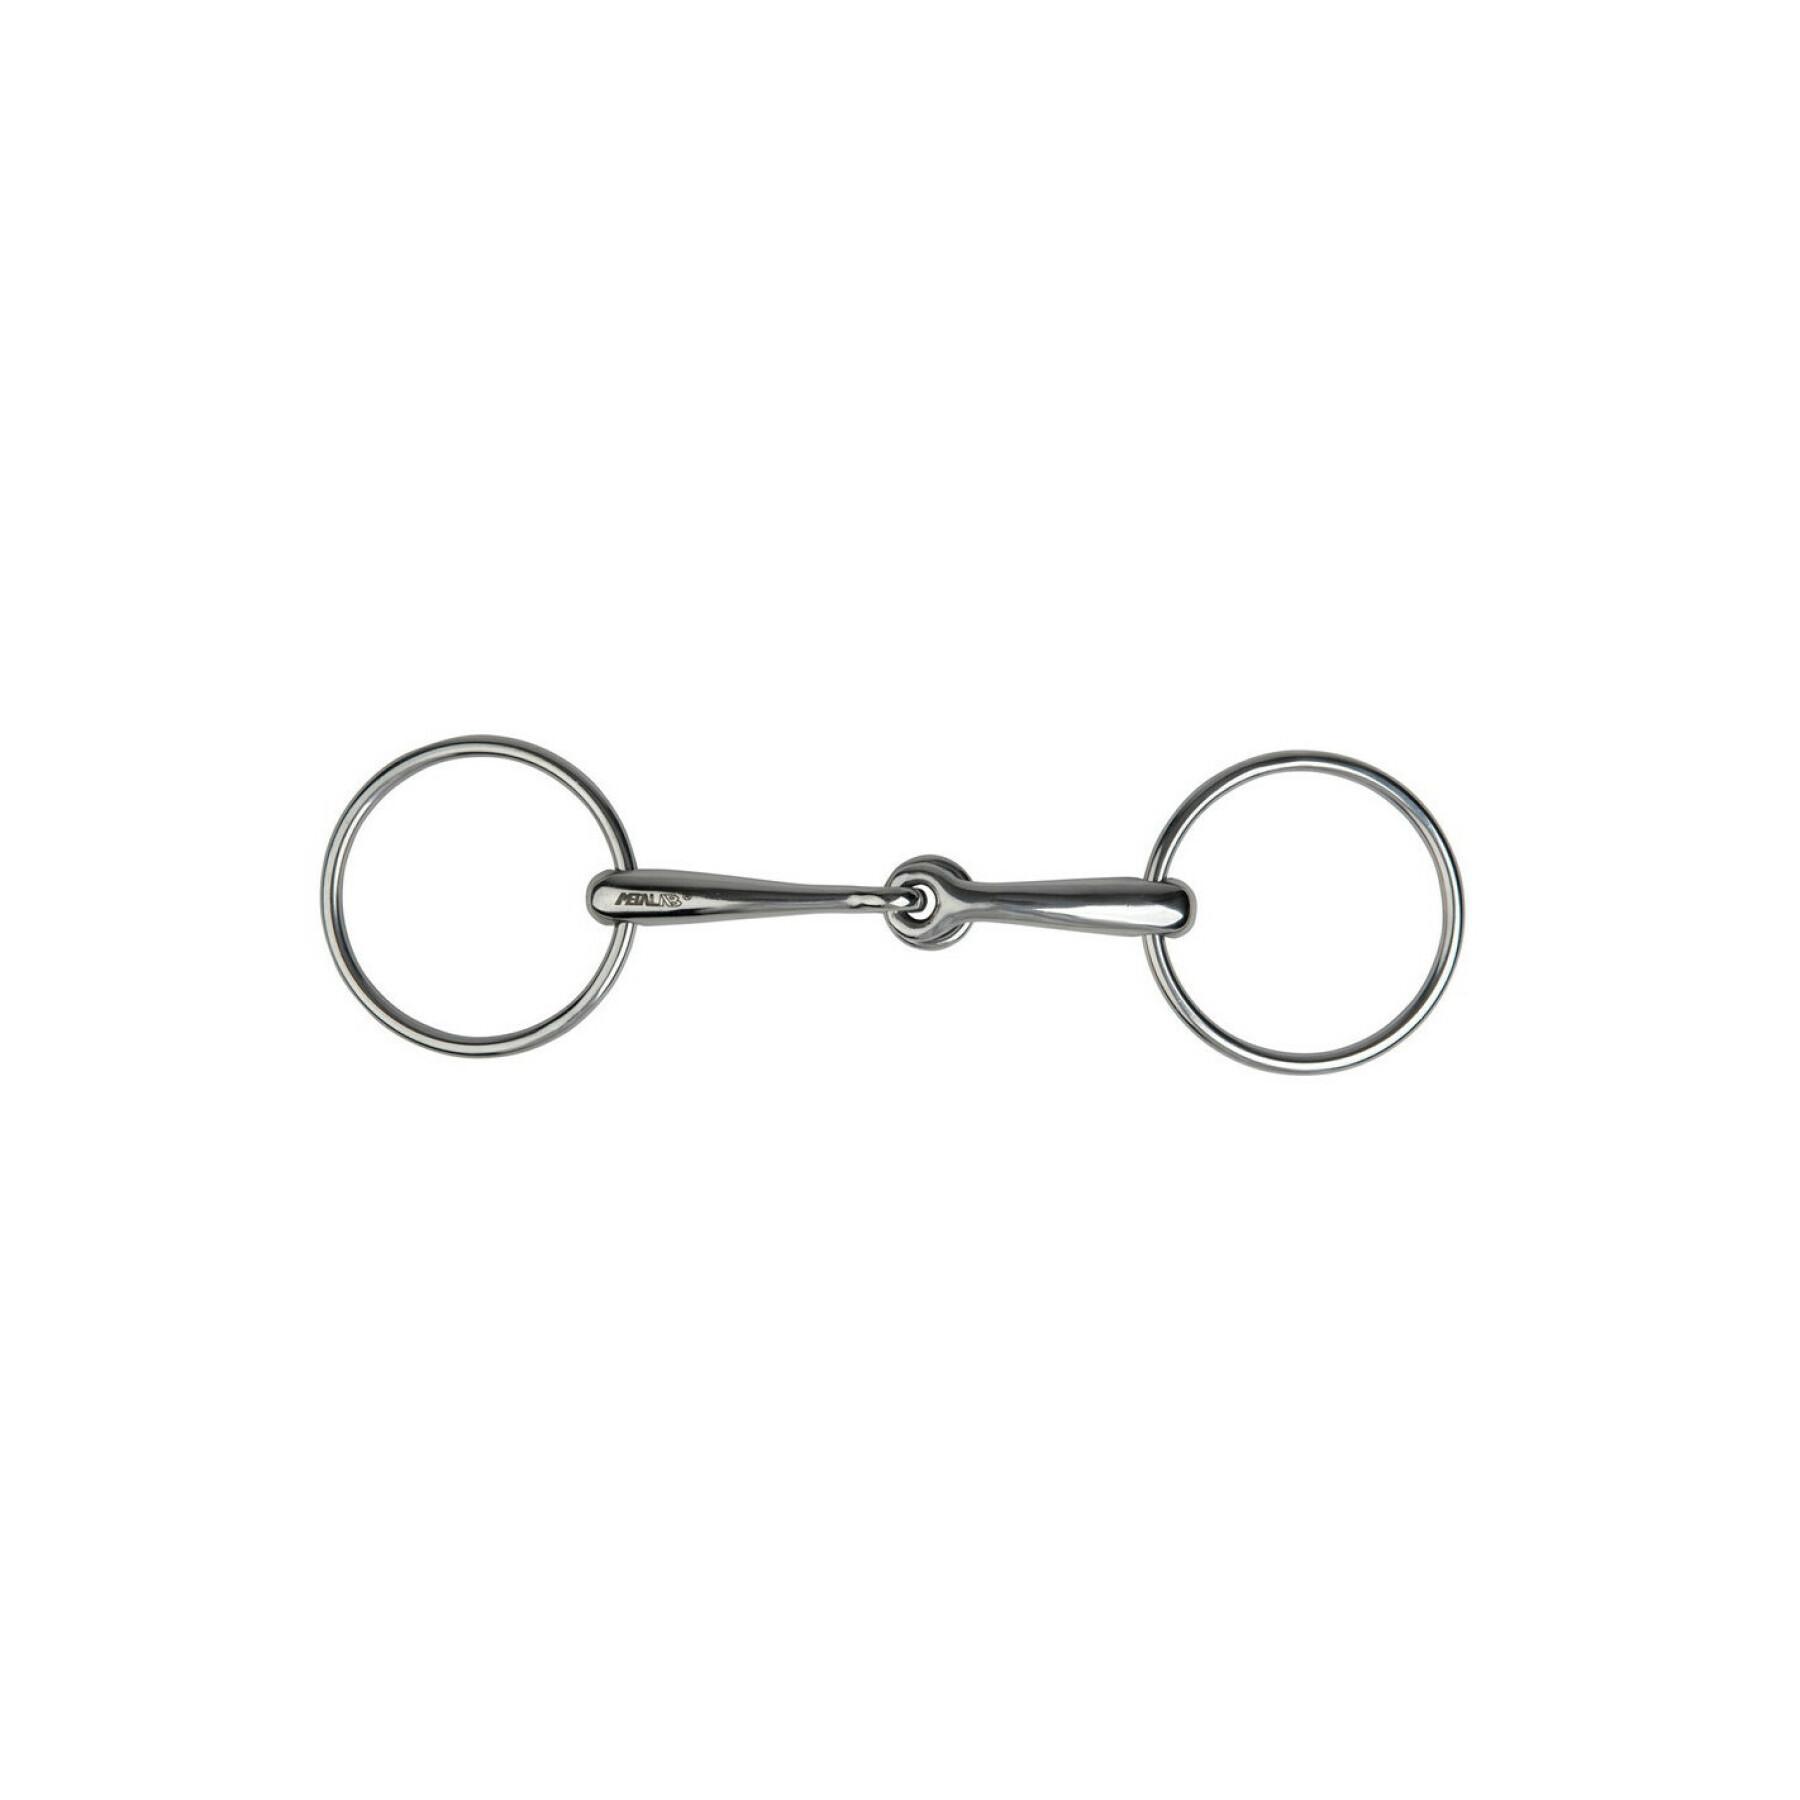 Two-ring snaffle bit in stainless steel Metalab